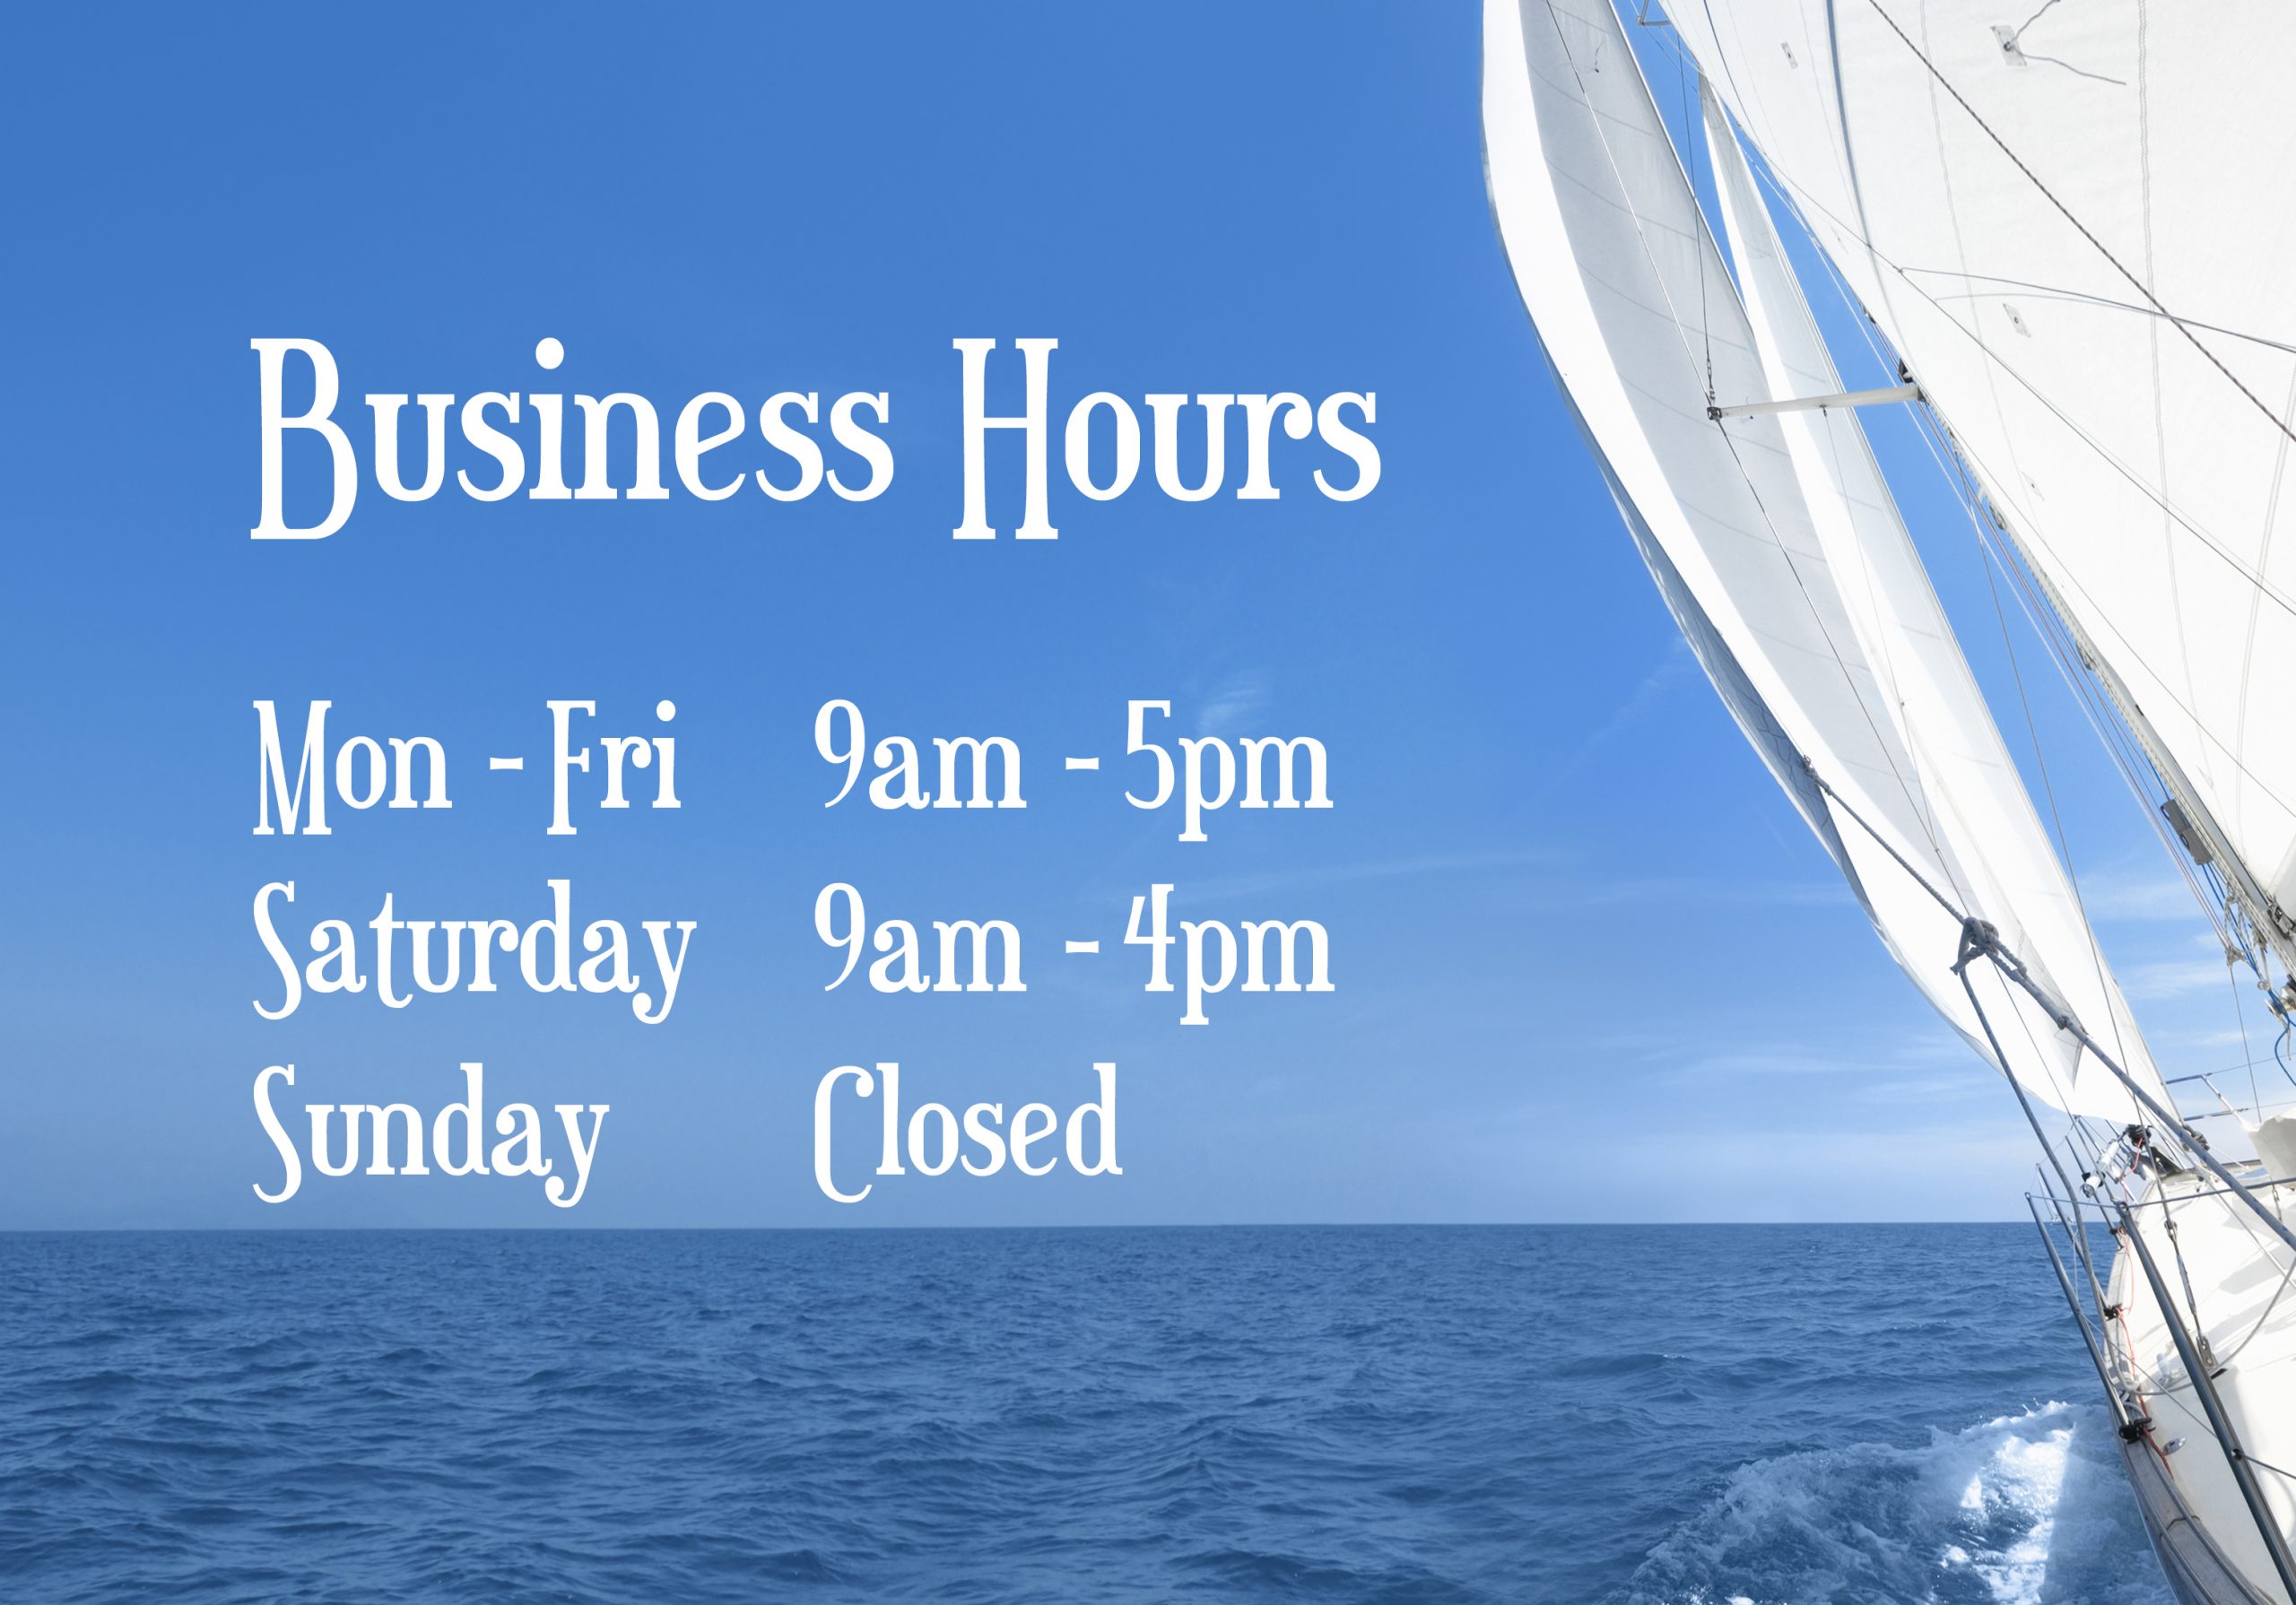 New Business Hours